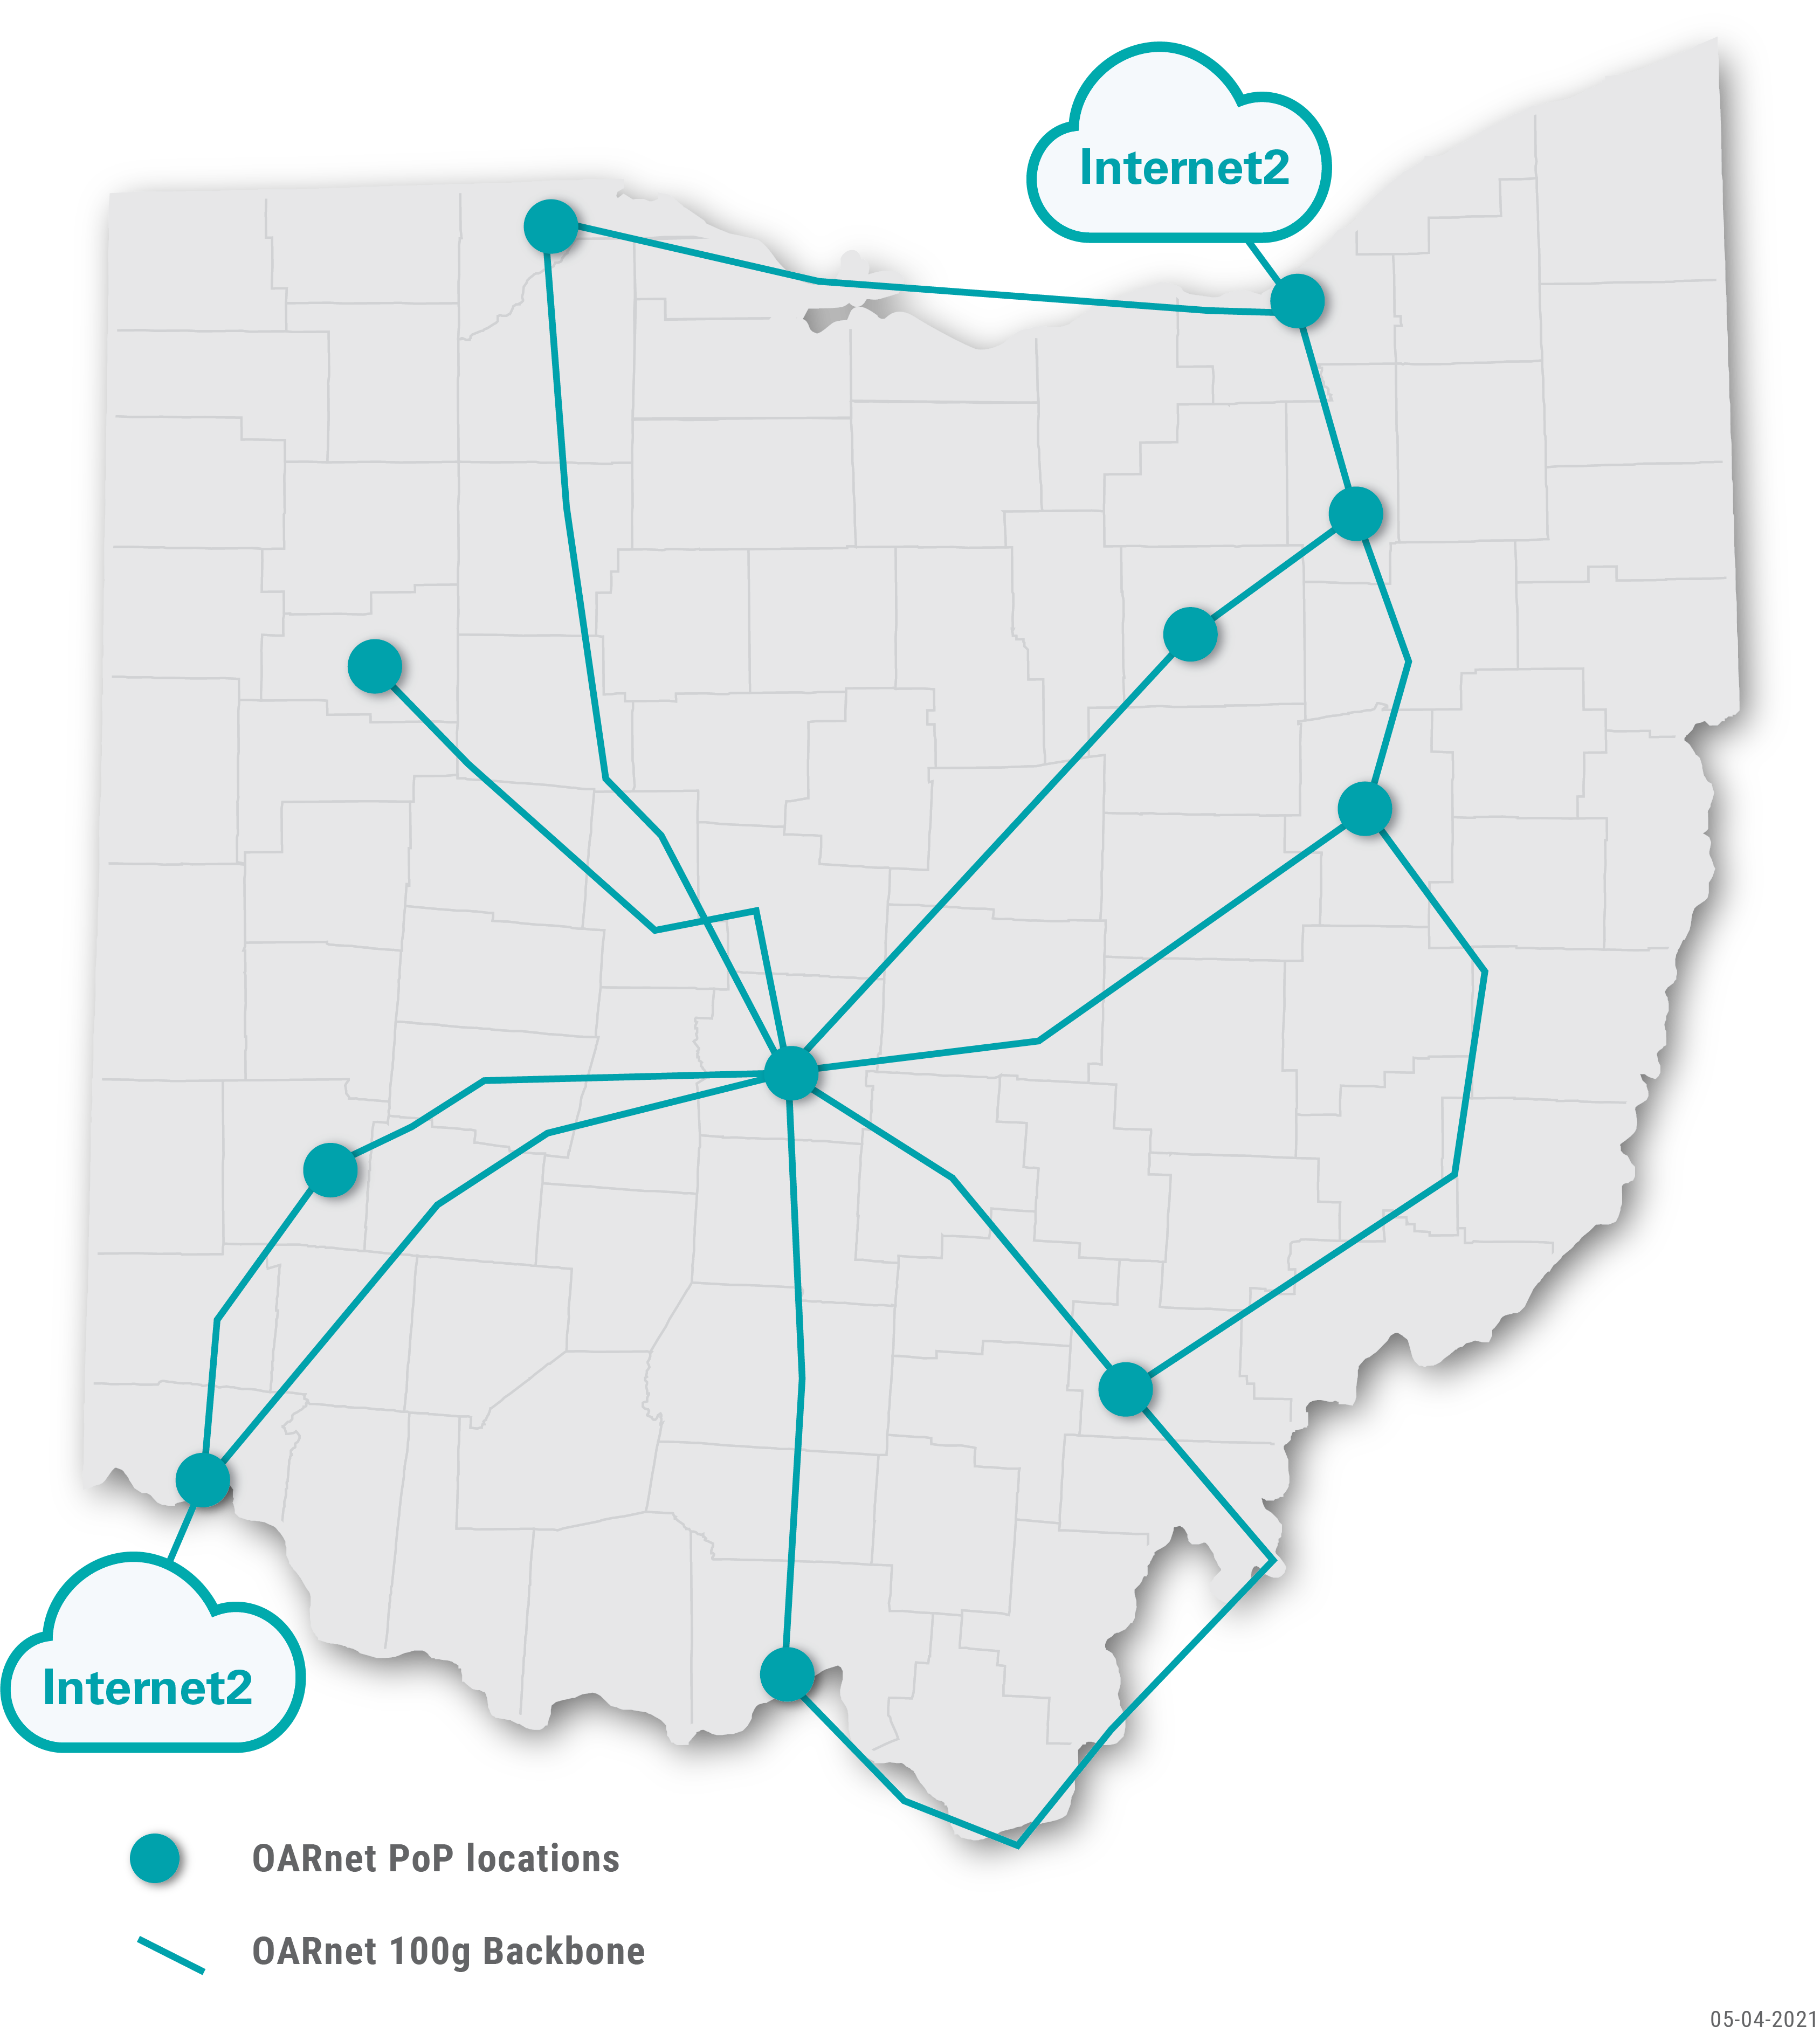 Map: Gray Ohio with counties. An illuminated line connects Toledo, Columbus, Cleveland, Akron, Wooster, Youngstown, Portsmouth, Athens, Dayton and Cincinnati to create the 100Gbps network. Links to Internet2 extend from Cleveland and Cincinnati